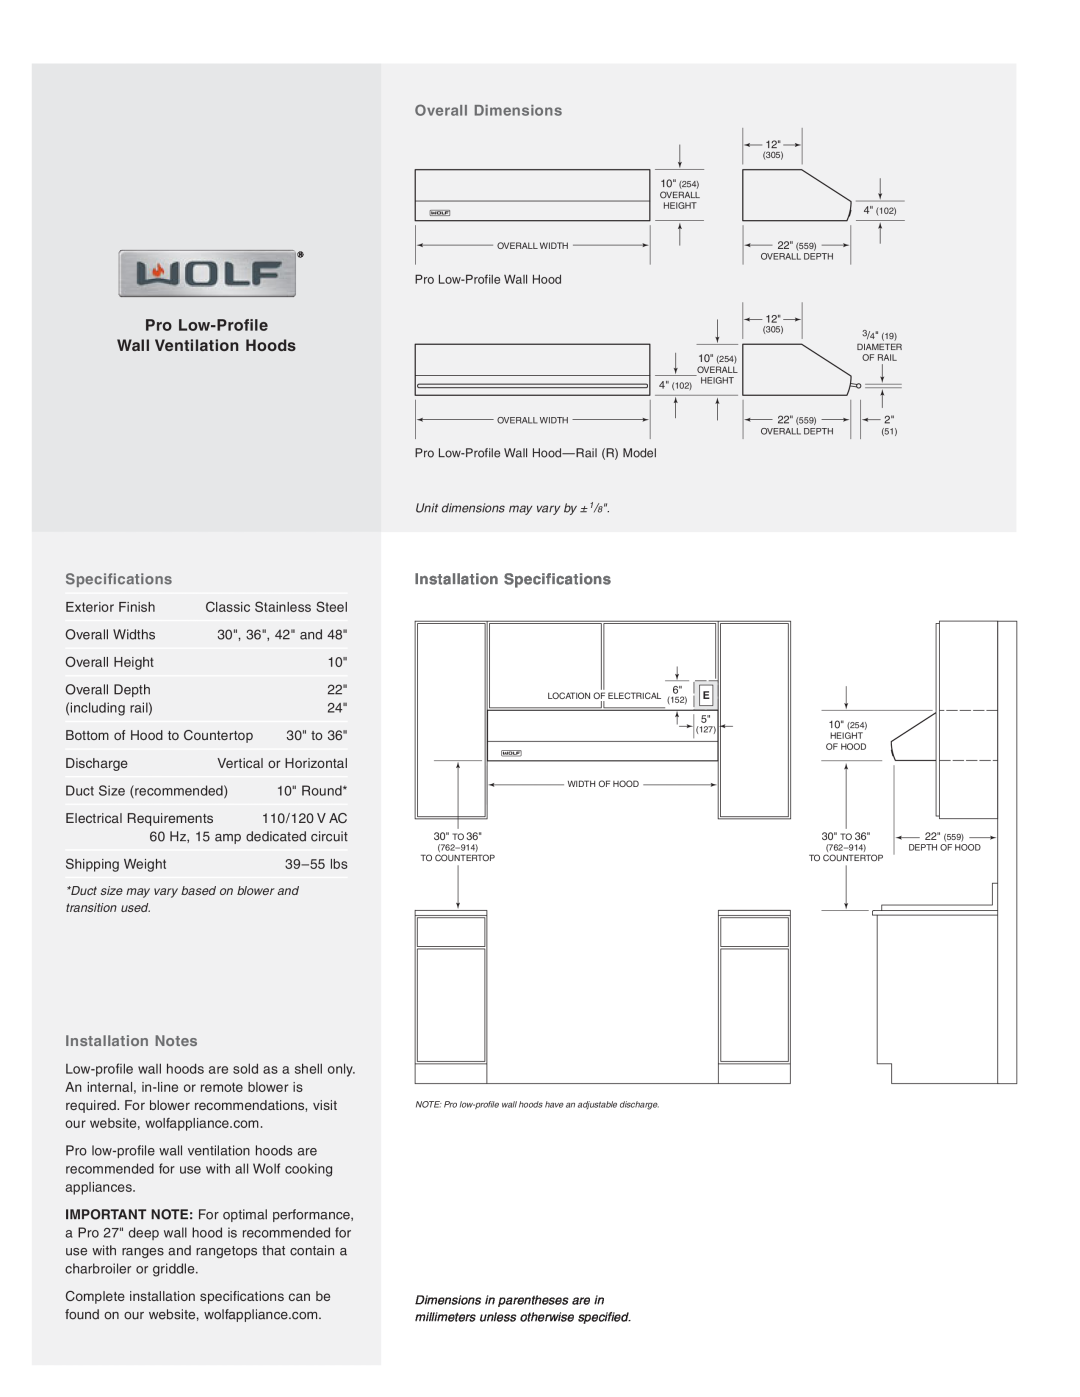 Wolf Appliance Company PW302210, PW422210, PW482210 Overall Dimensions, Installation Specifications, Installation Notes 